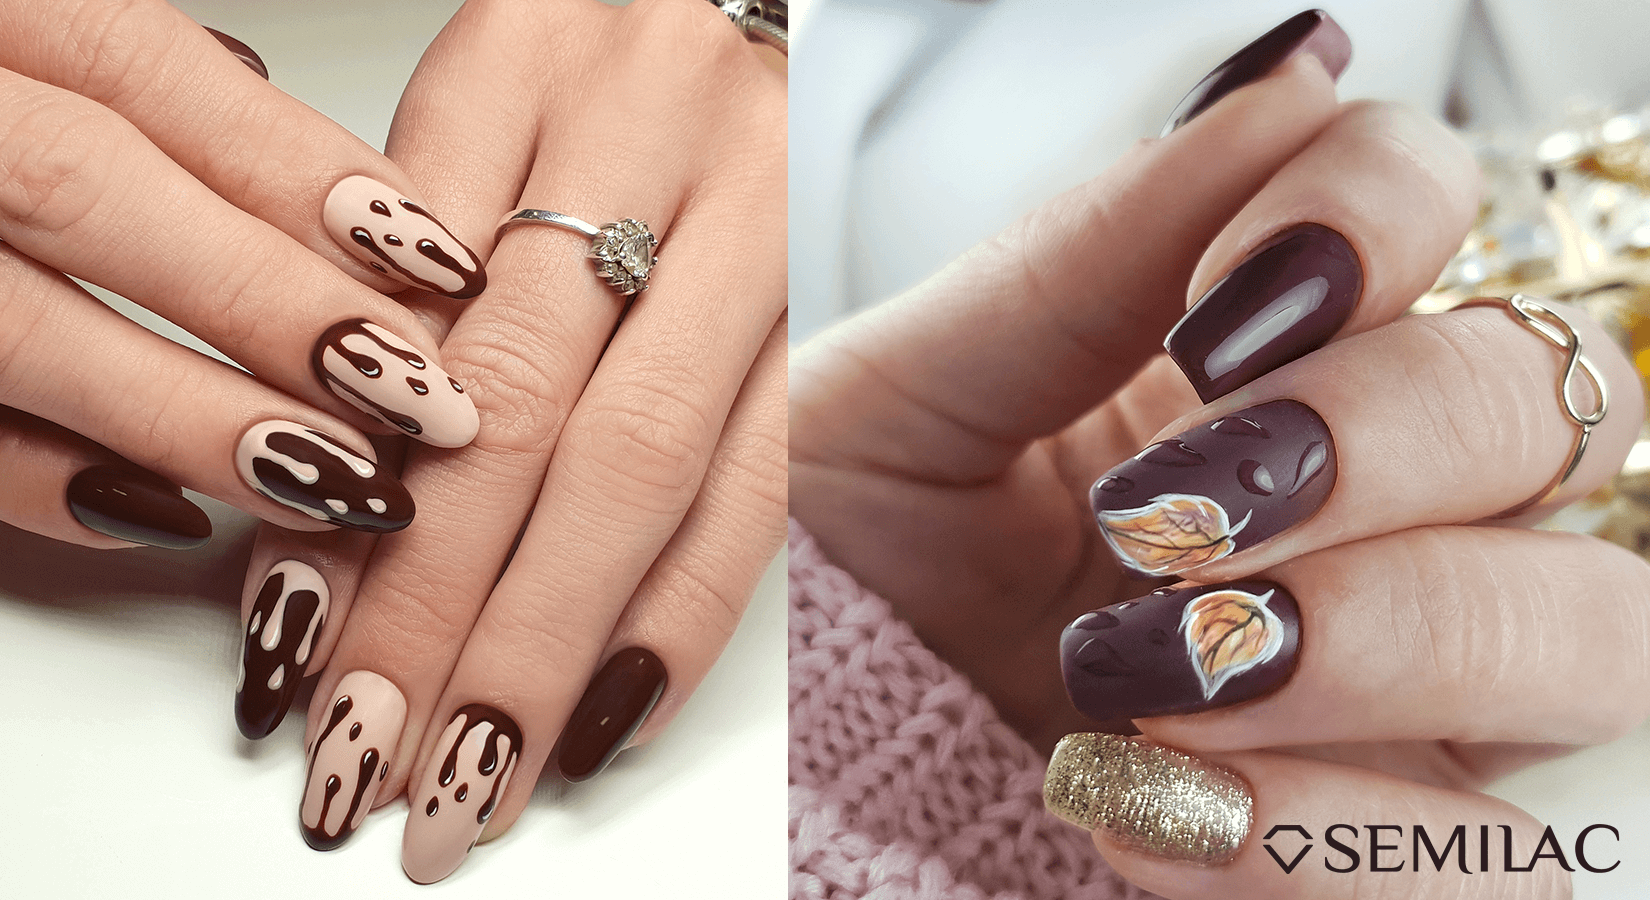 The Best Brown UV Gel Nail Polishes for Every Occasion